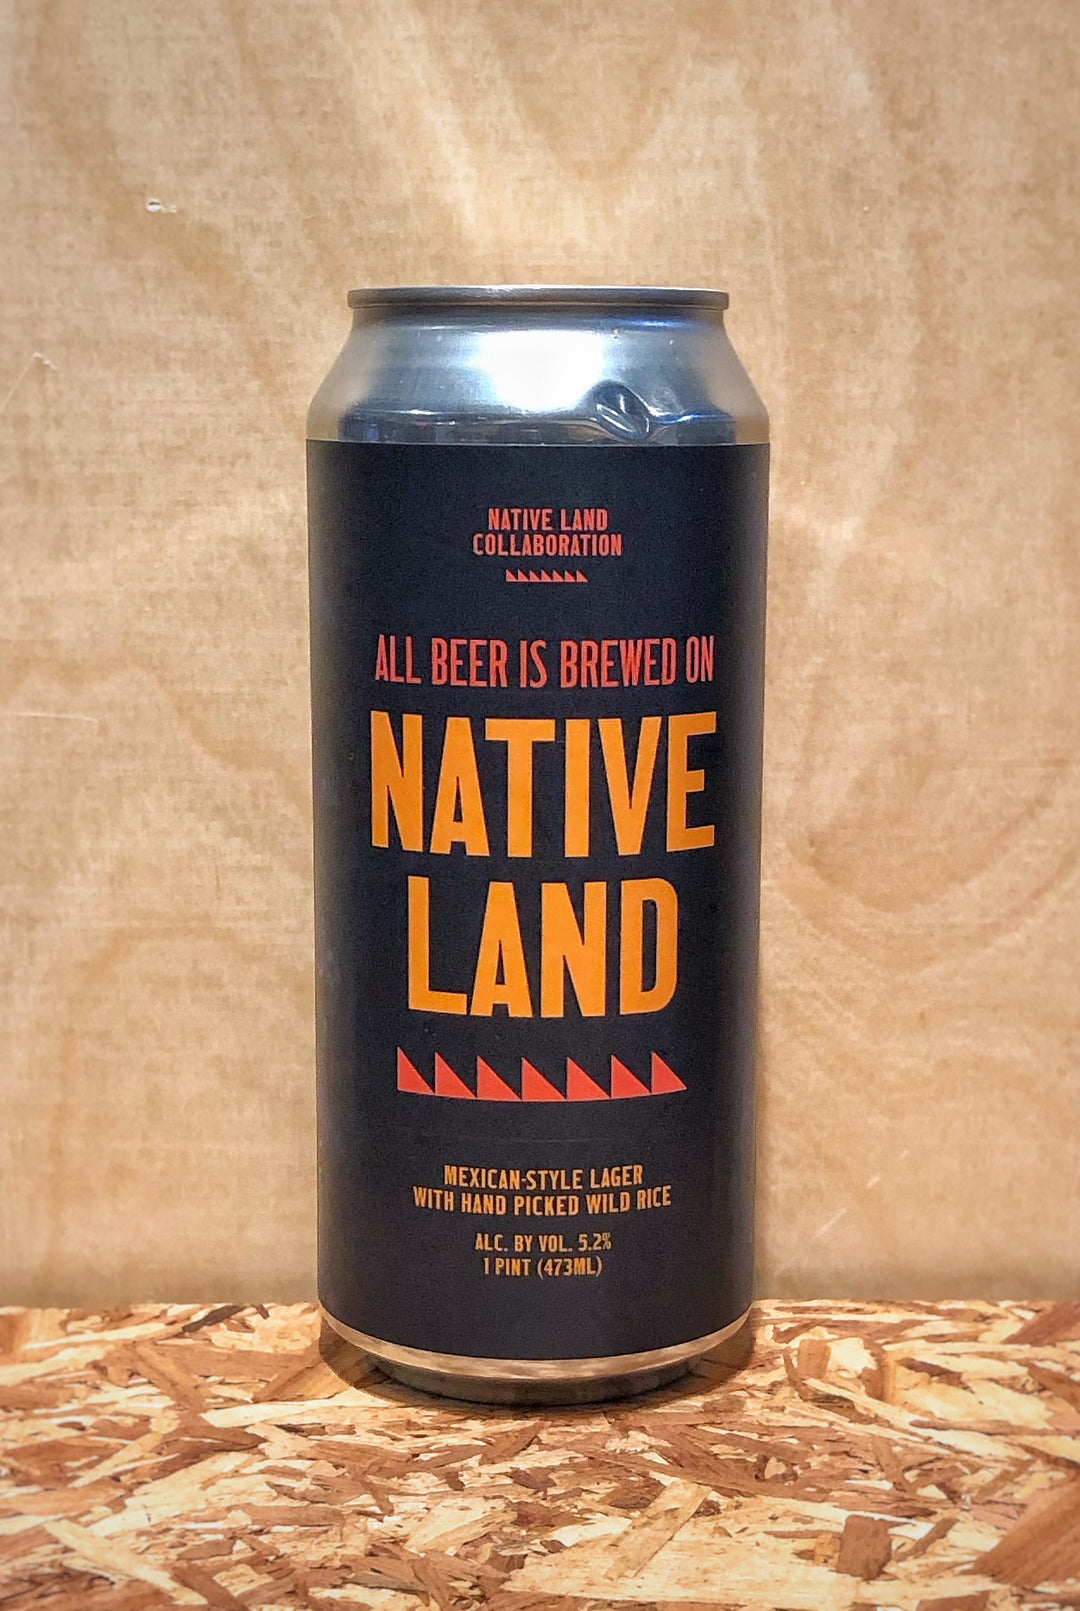 River's Edge Brewing Co. 'Native Land' Mexican-Style Lager with Hand Picked Wild Rice (Milford, MI)